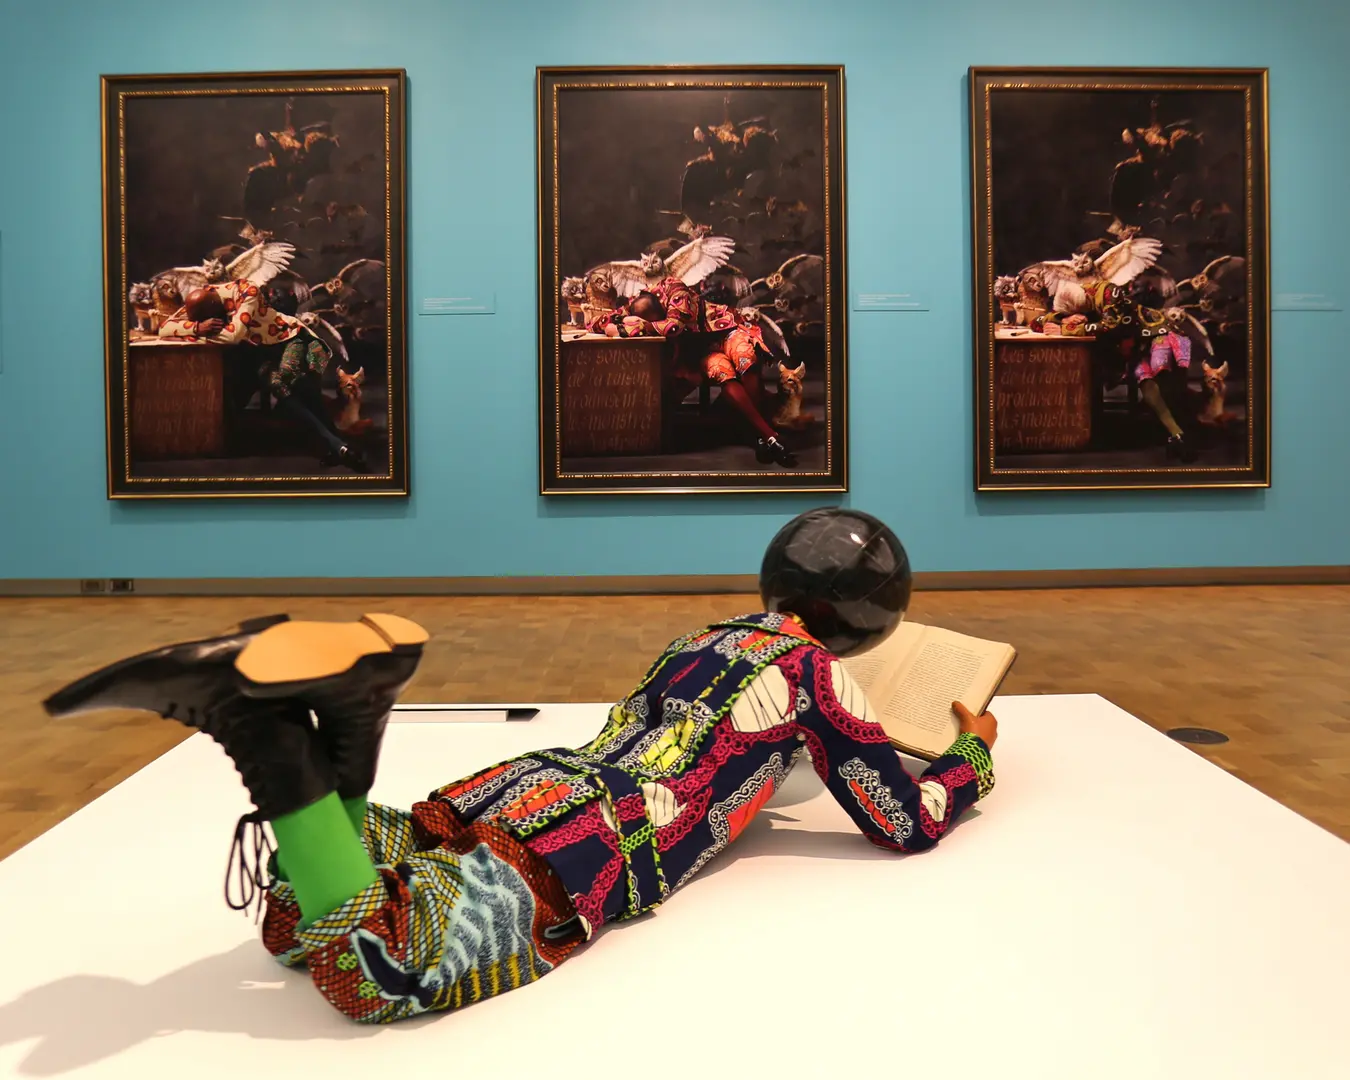 Yinka Shonibare MBE, Planets in My Head, Philosophy, 2011. Mannequin, Dutch wax printed cotton, leather and fiberglass, 16 x 16 x 45 inches. Photo by Darryl W. Moran, courtesy of The Barnes Foundation.